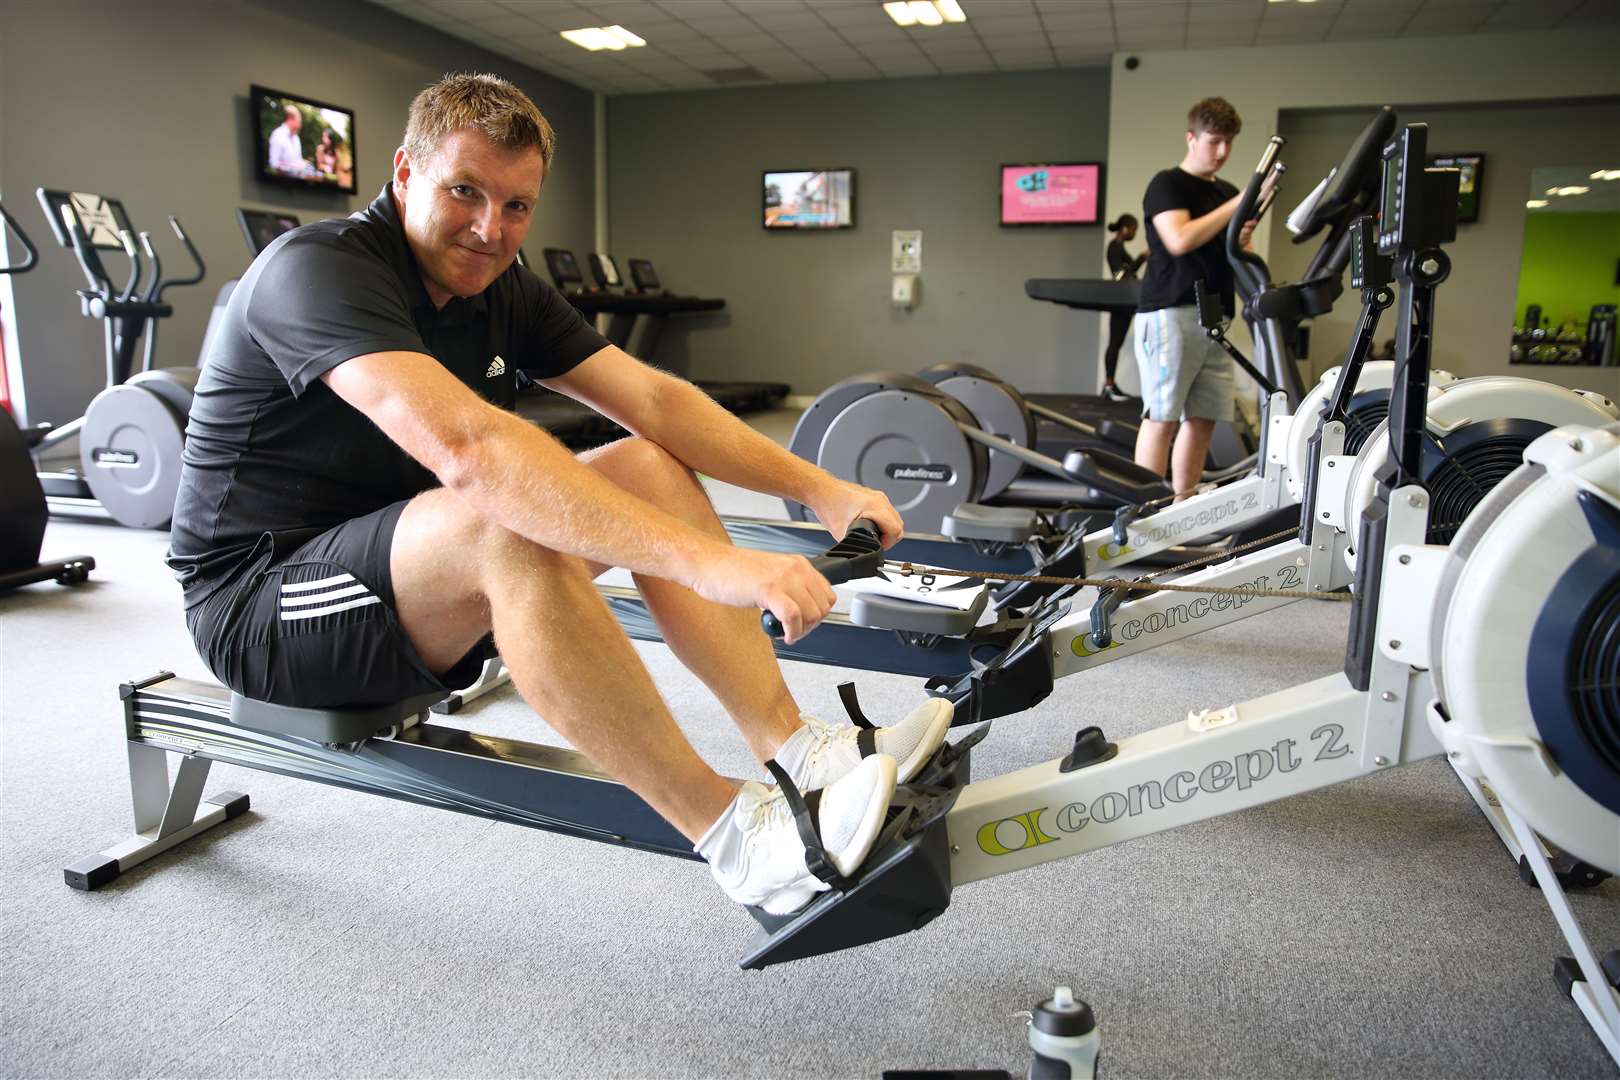 Darren Gibbons was among gym users back at Cascades leisure centre